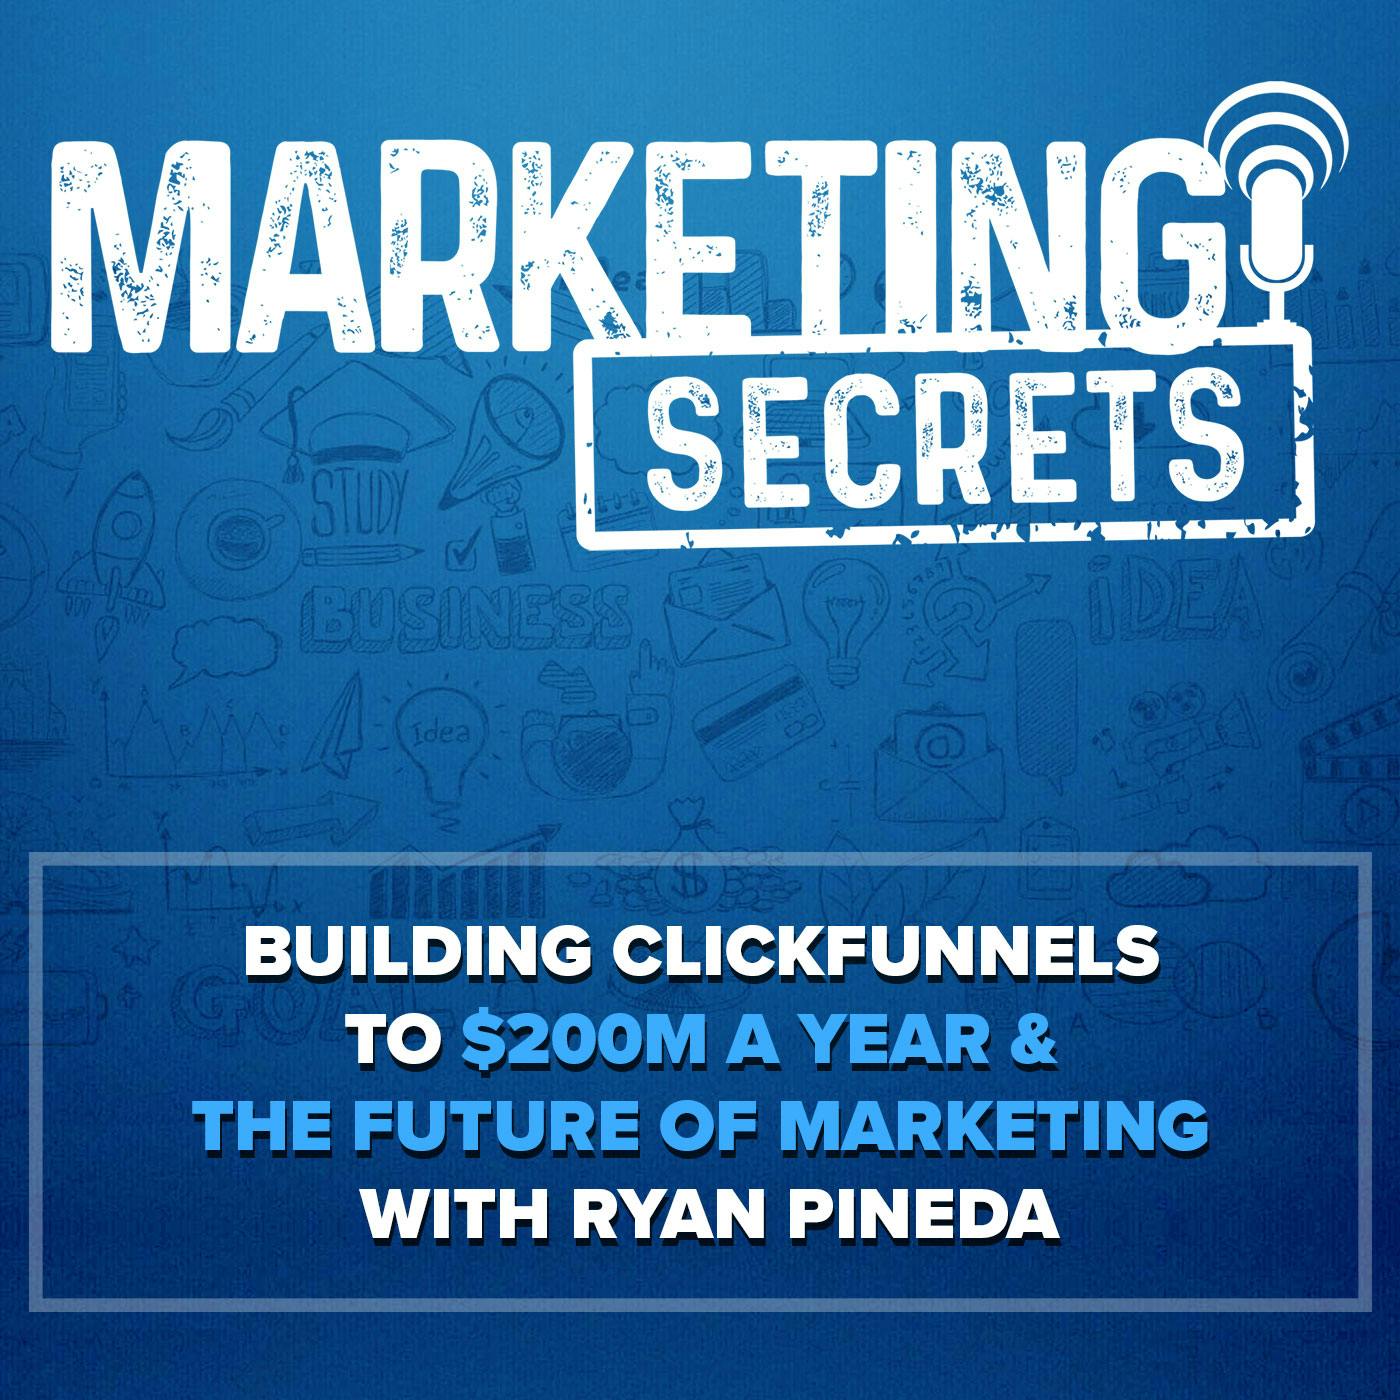 Building ClickFunnels to $200M a Year & The Future of Marketing with Ryan Pineda